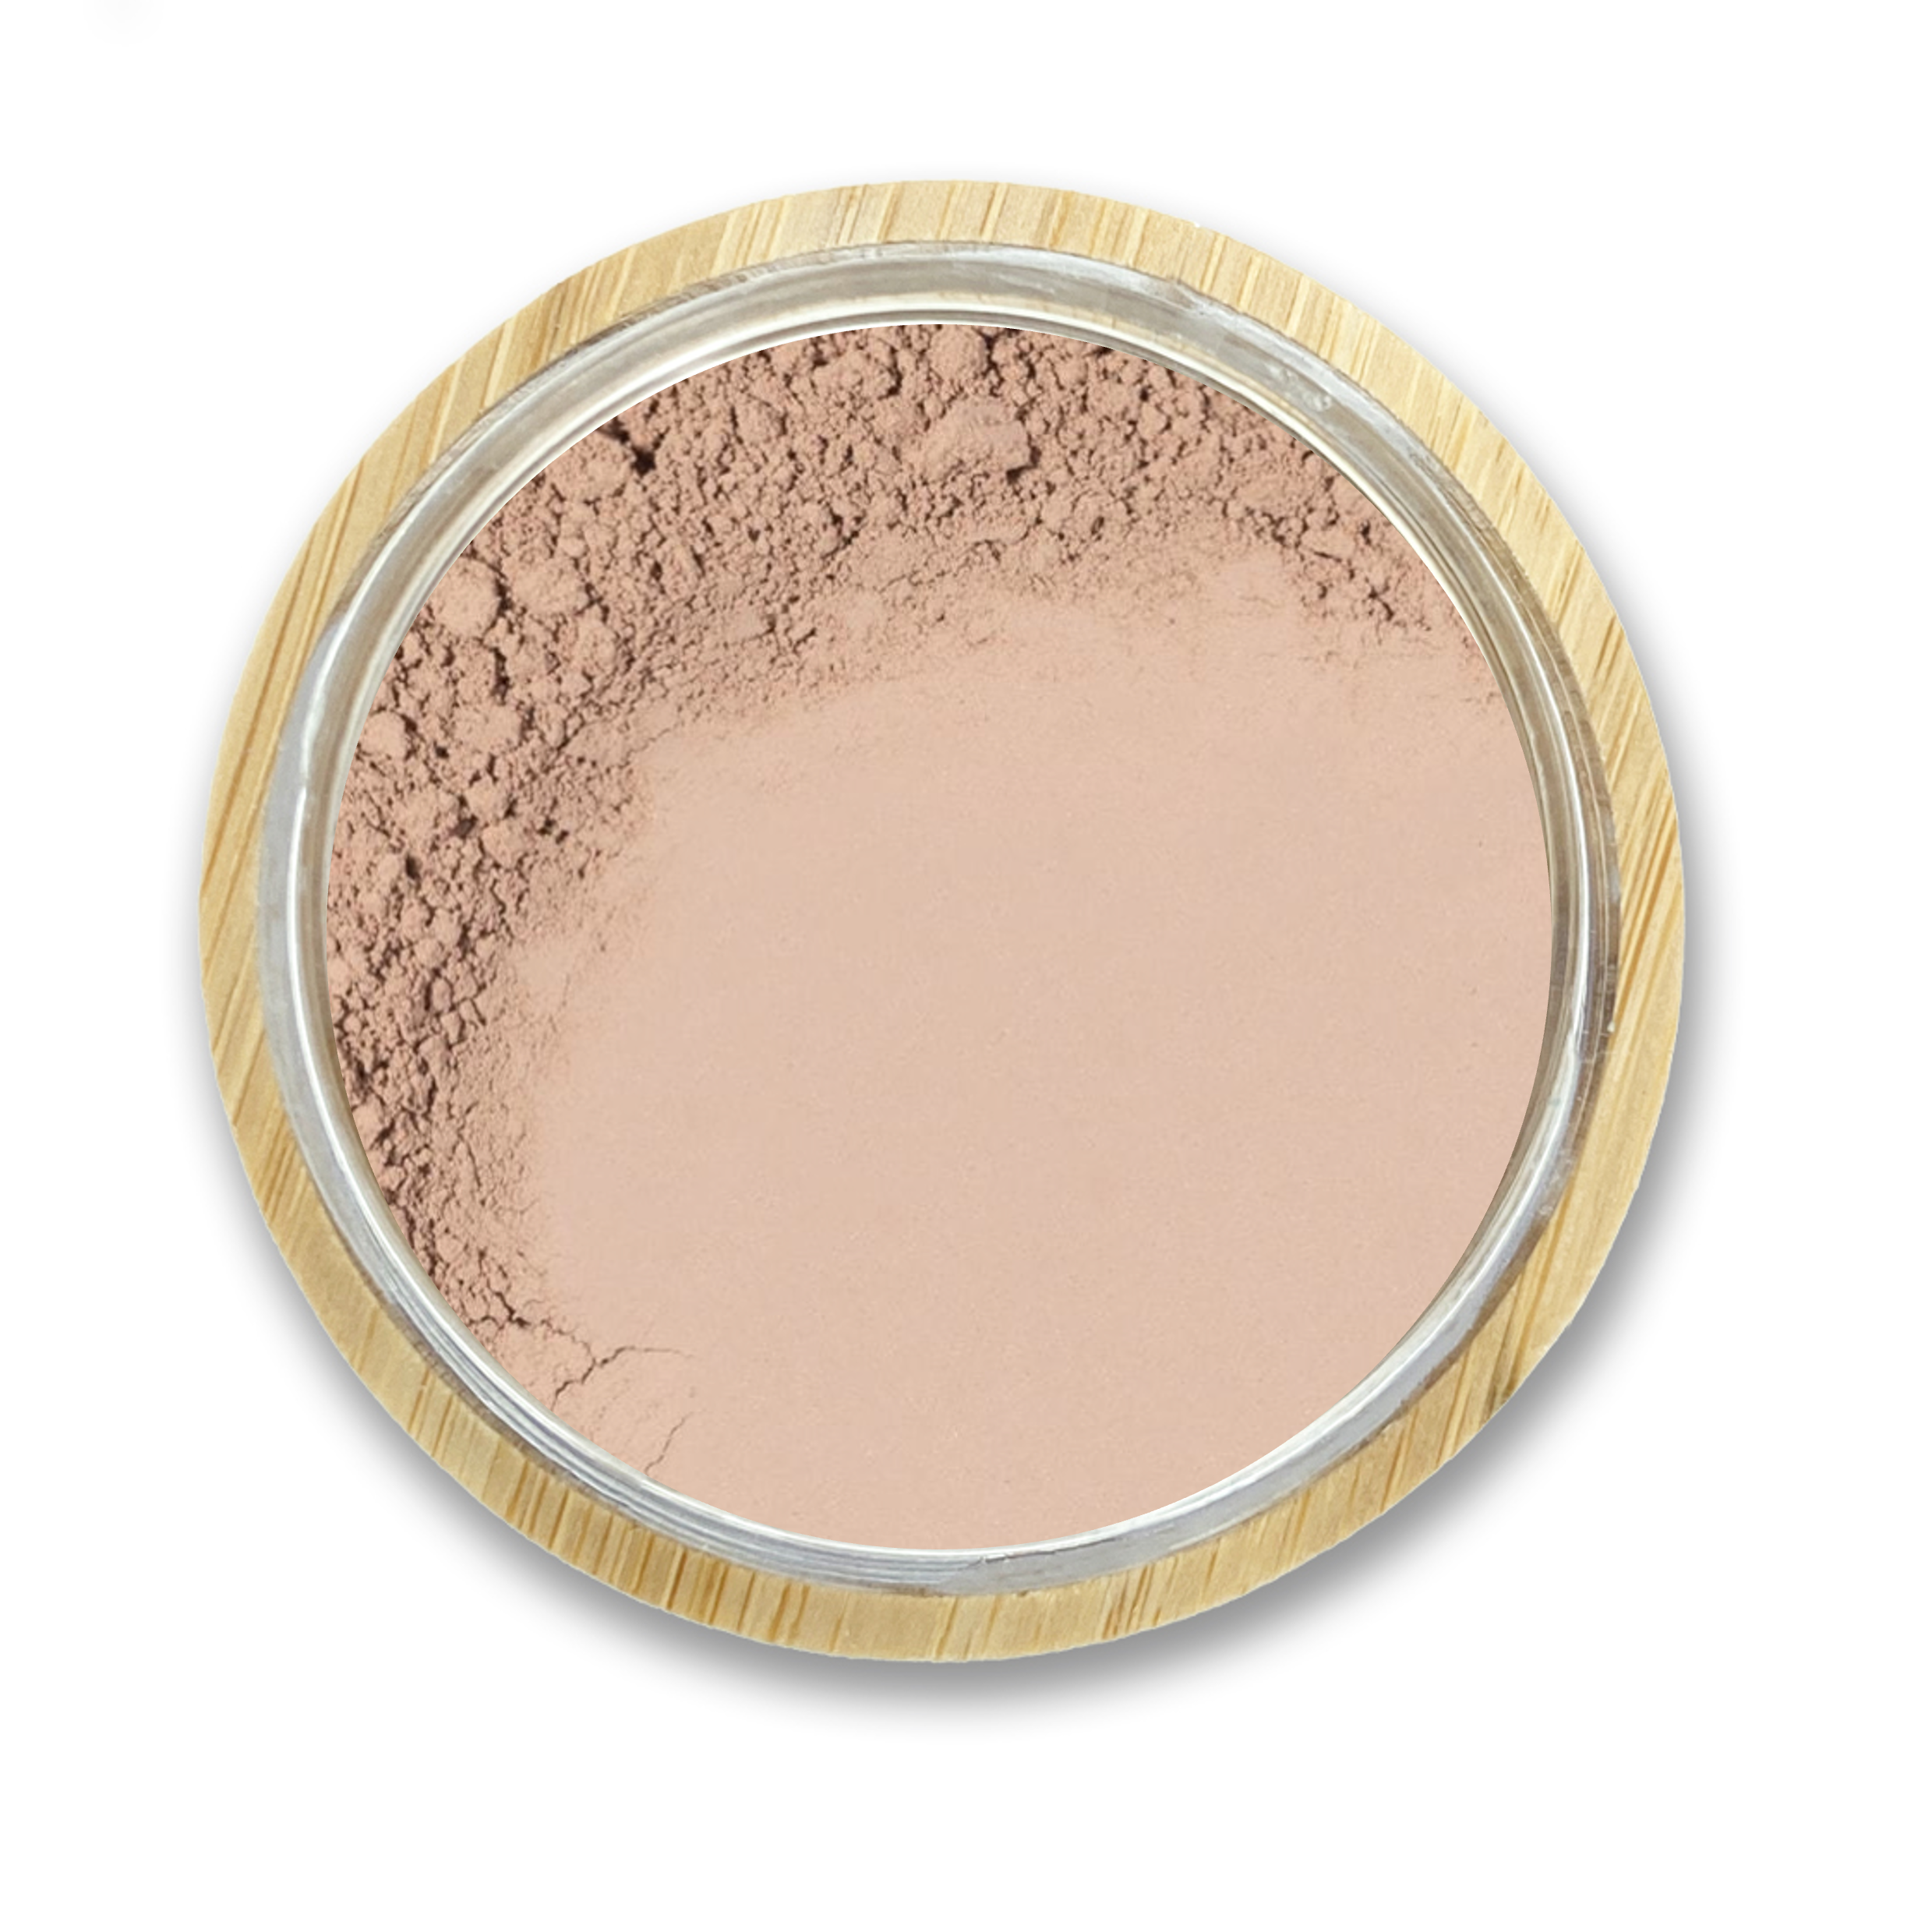 LARGE Loose Powder Mineral Bronzer - Without Mica, Titanium Dioxide, & More!